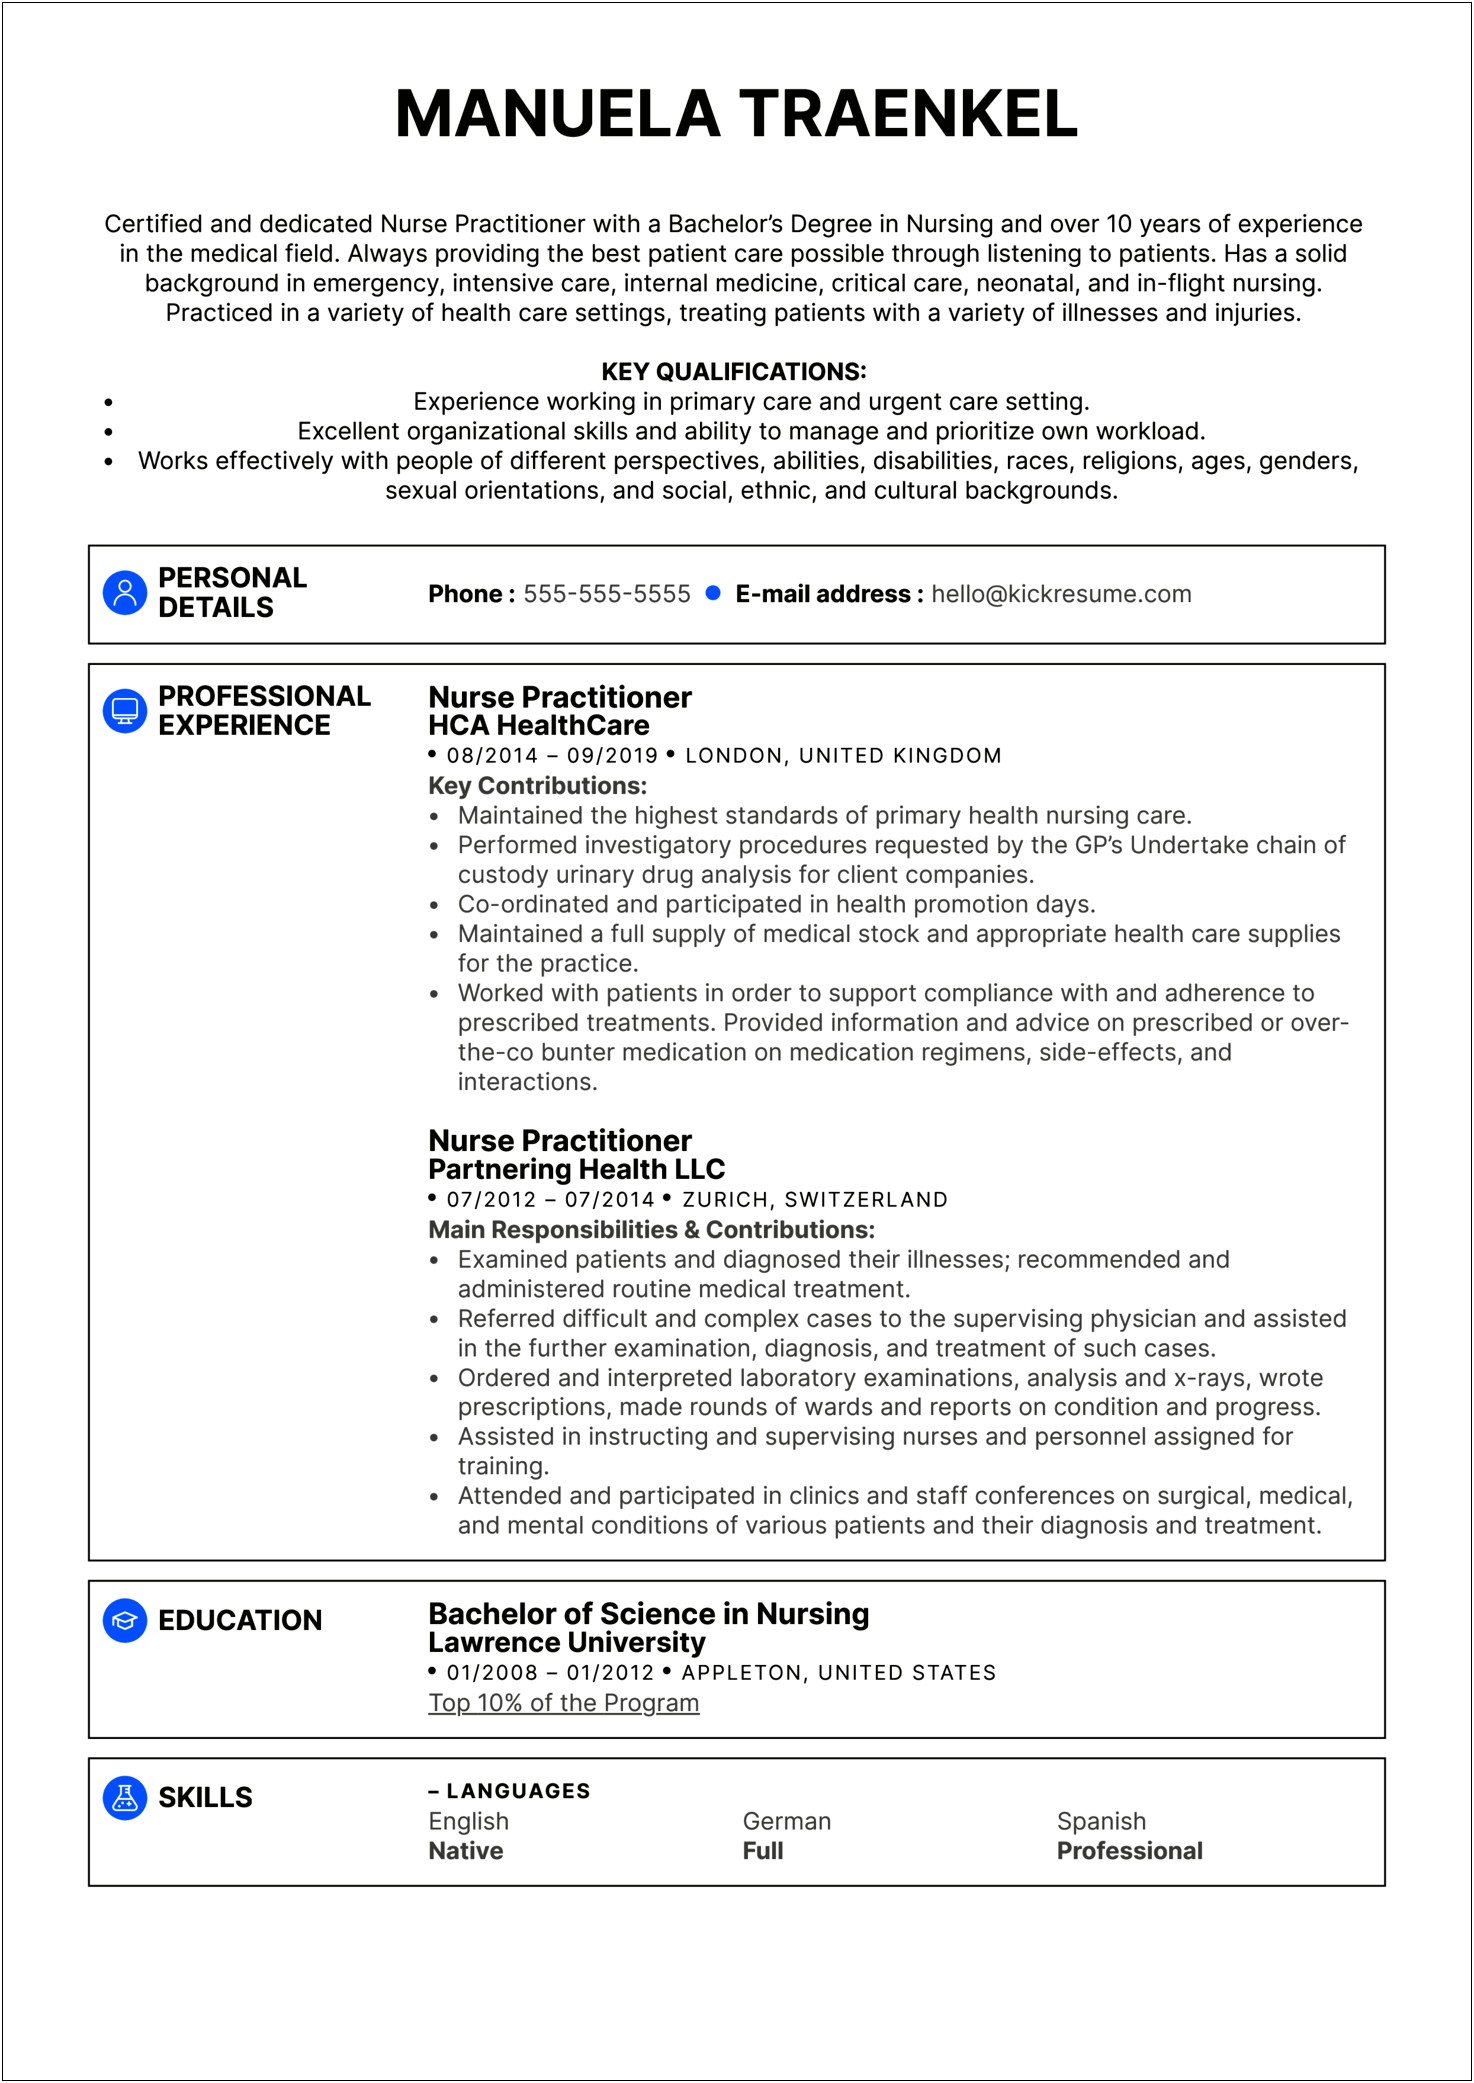 Example Resume For Acute Care Nurse Practitioner